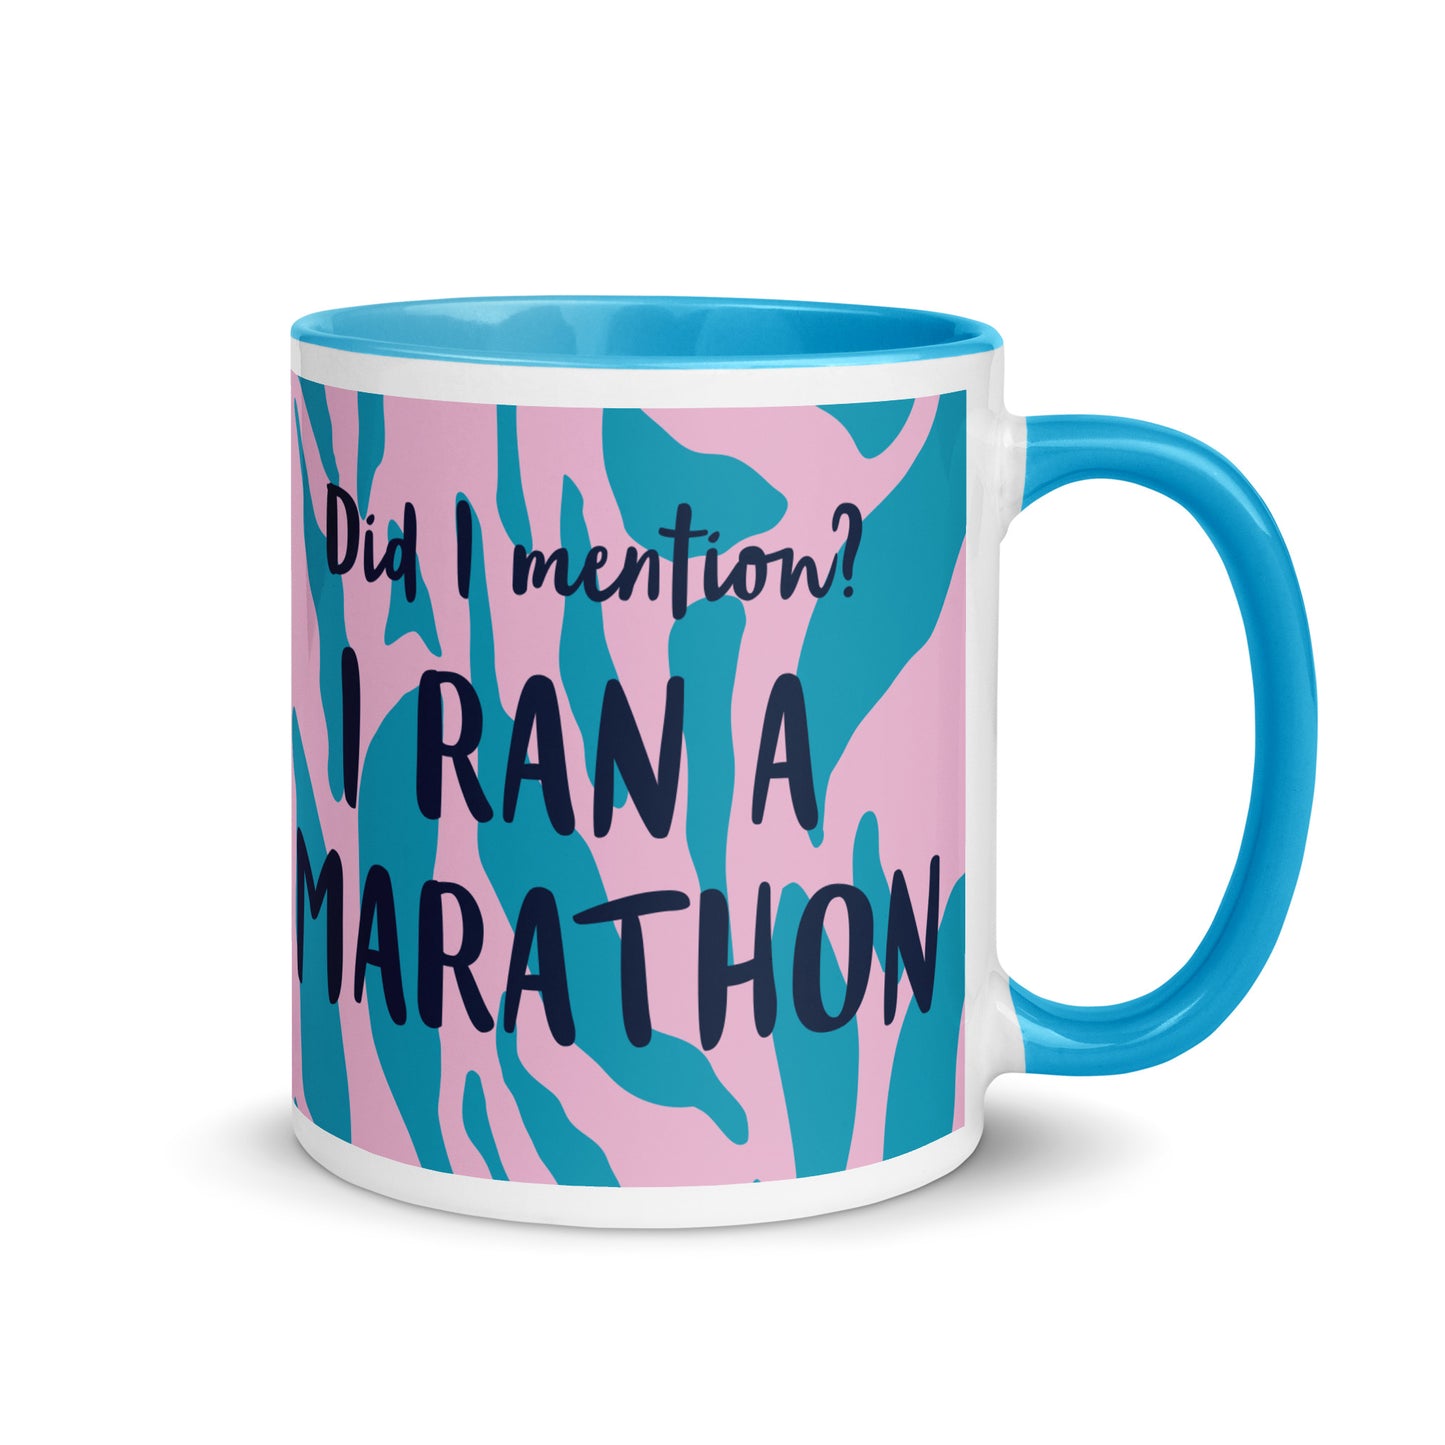 blue handled coffee mug with a pink and blue leopard print design, with the words did i mention? I ran a marathon in a bold font  